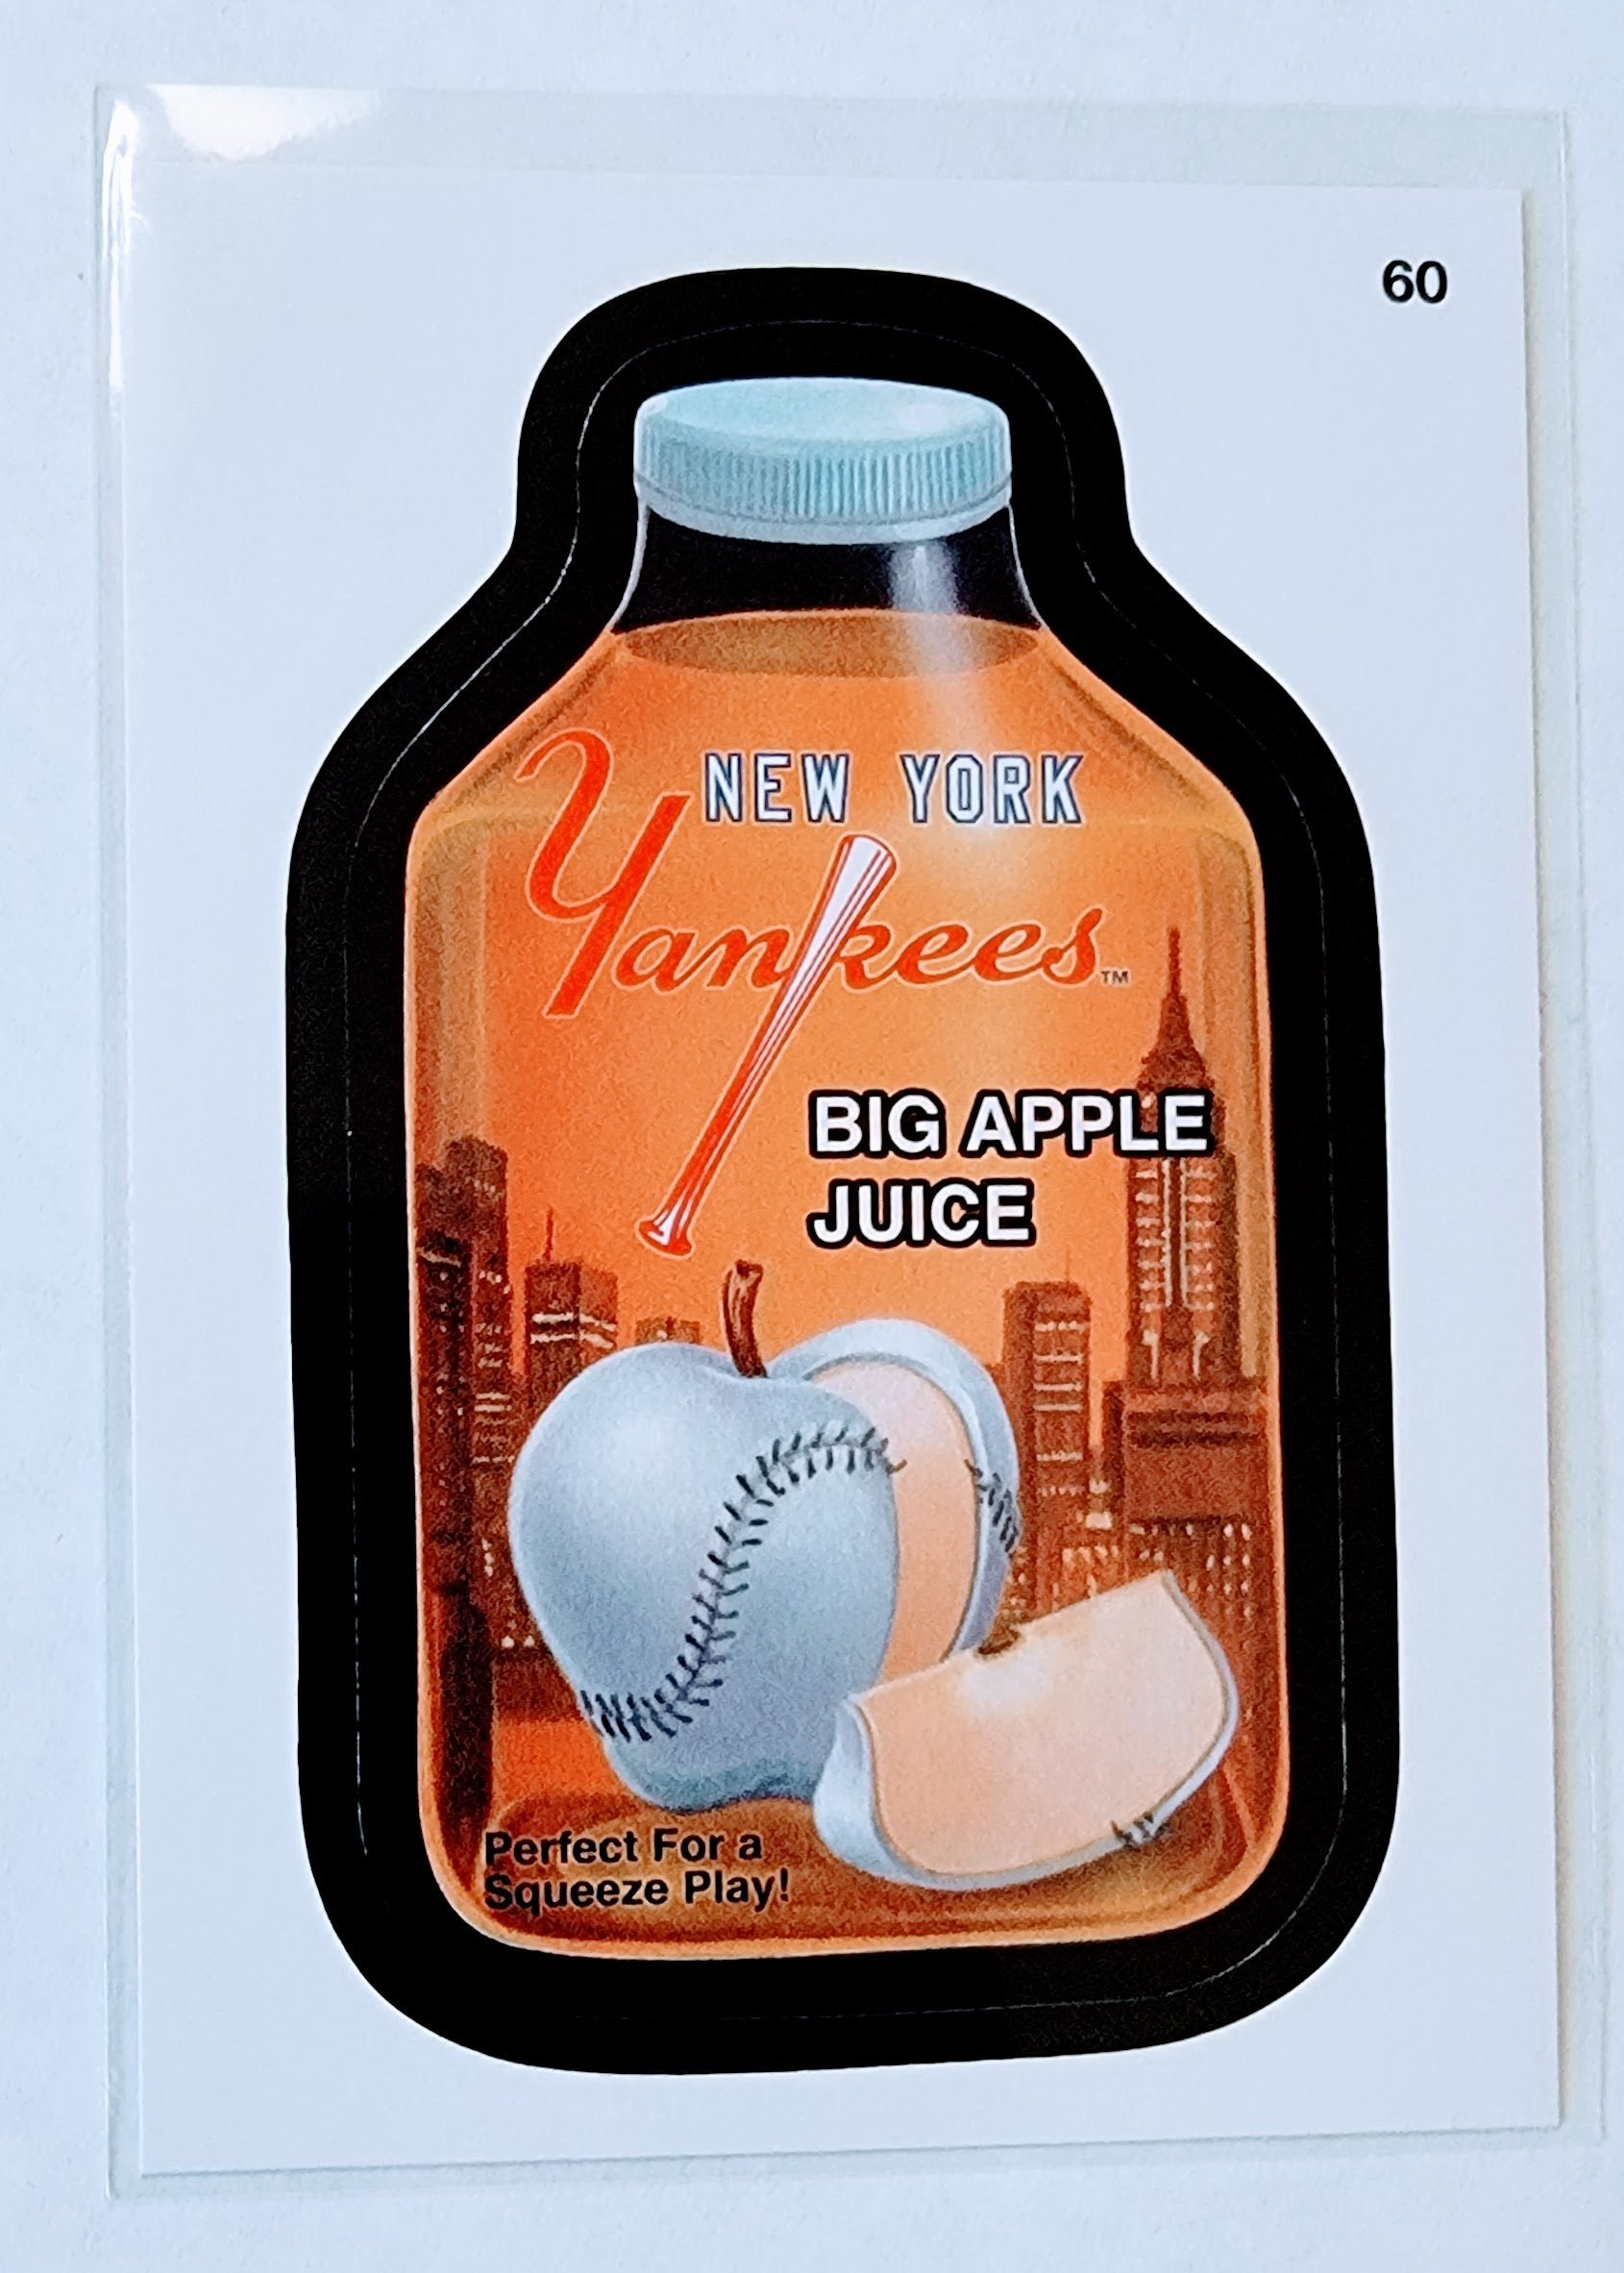 2016 Topps MLB Baseball Wacky Packages NY Yankees Big Apple Juice Sticker Trading Card MCSC1 simple Xclusive Collectibles   